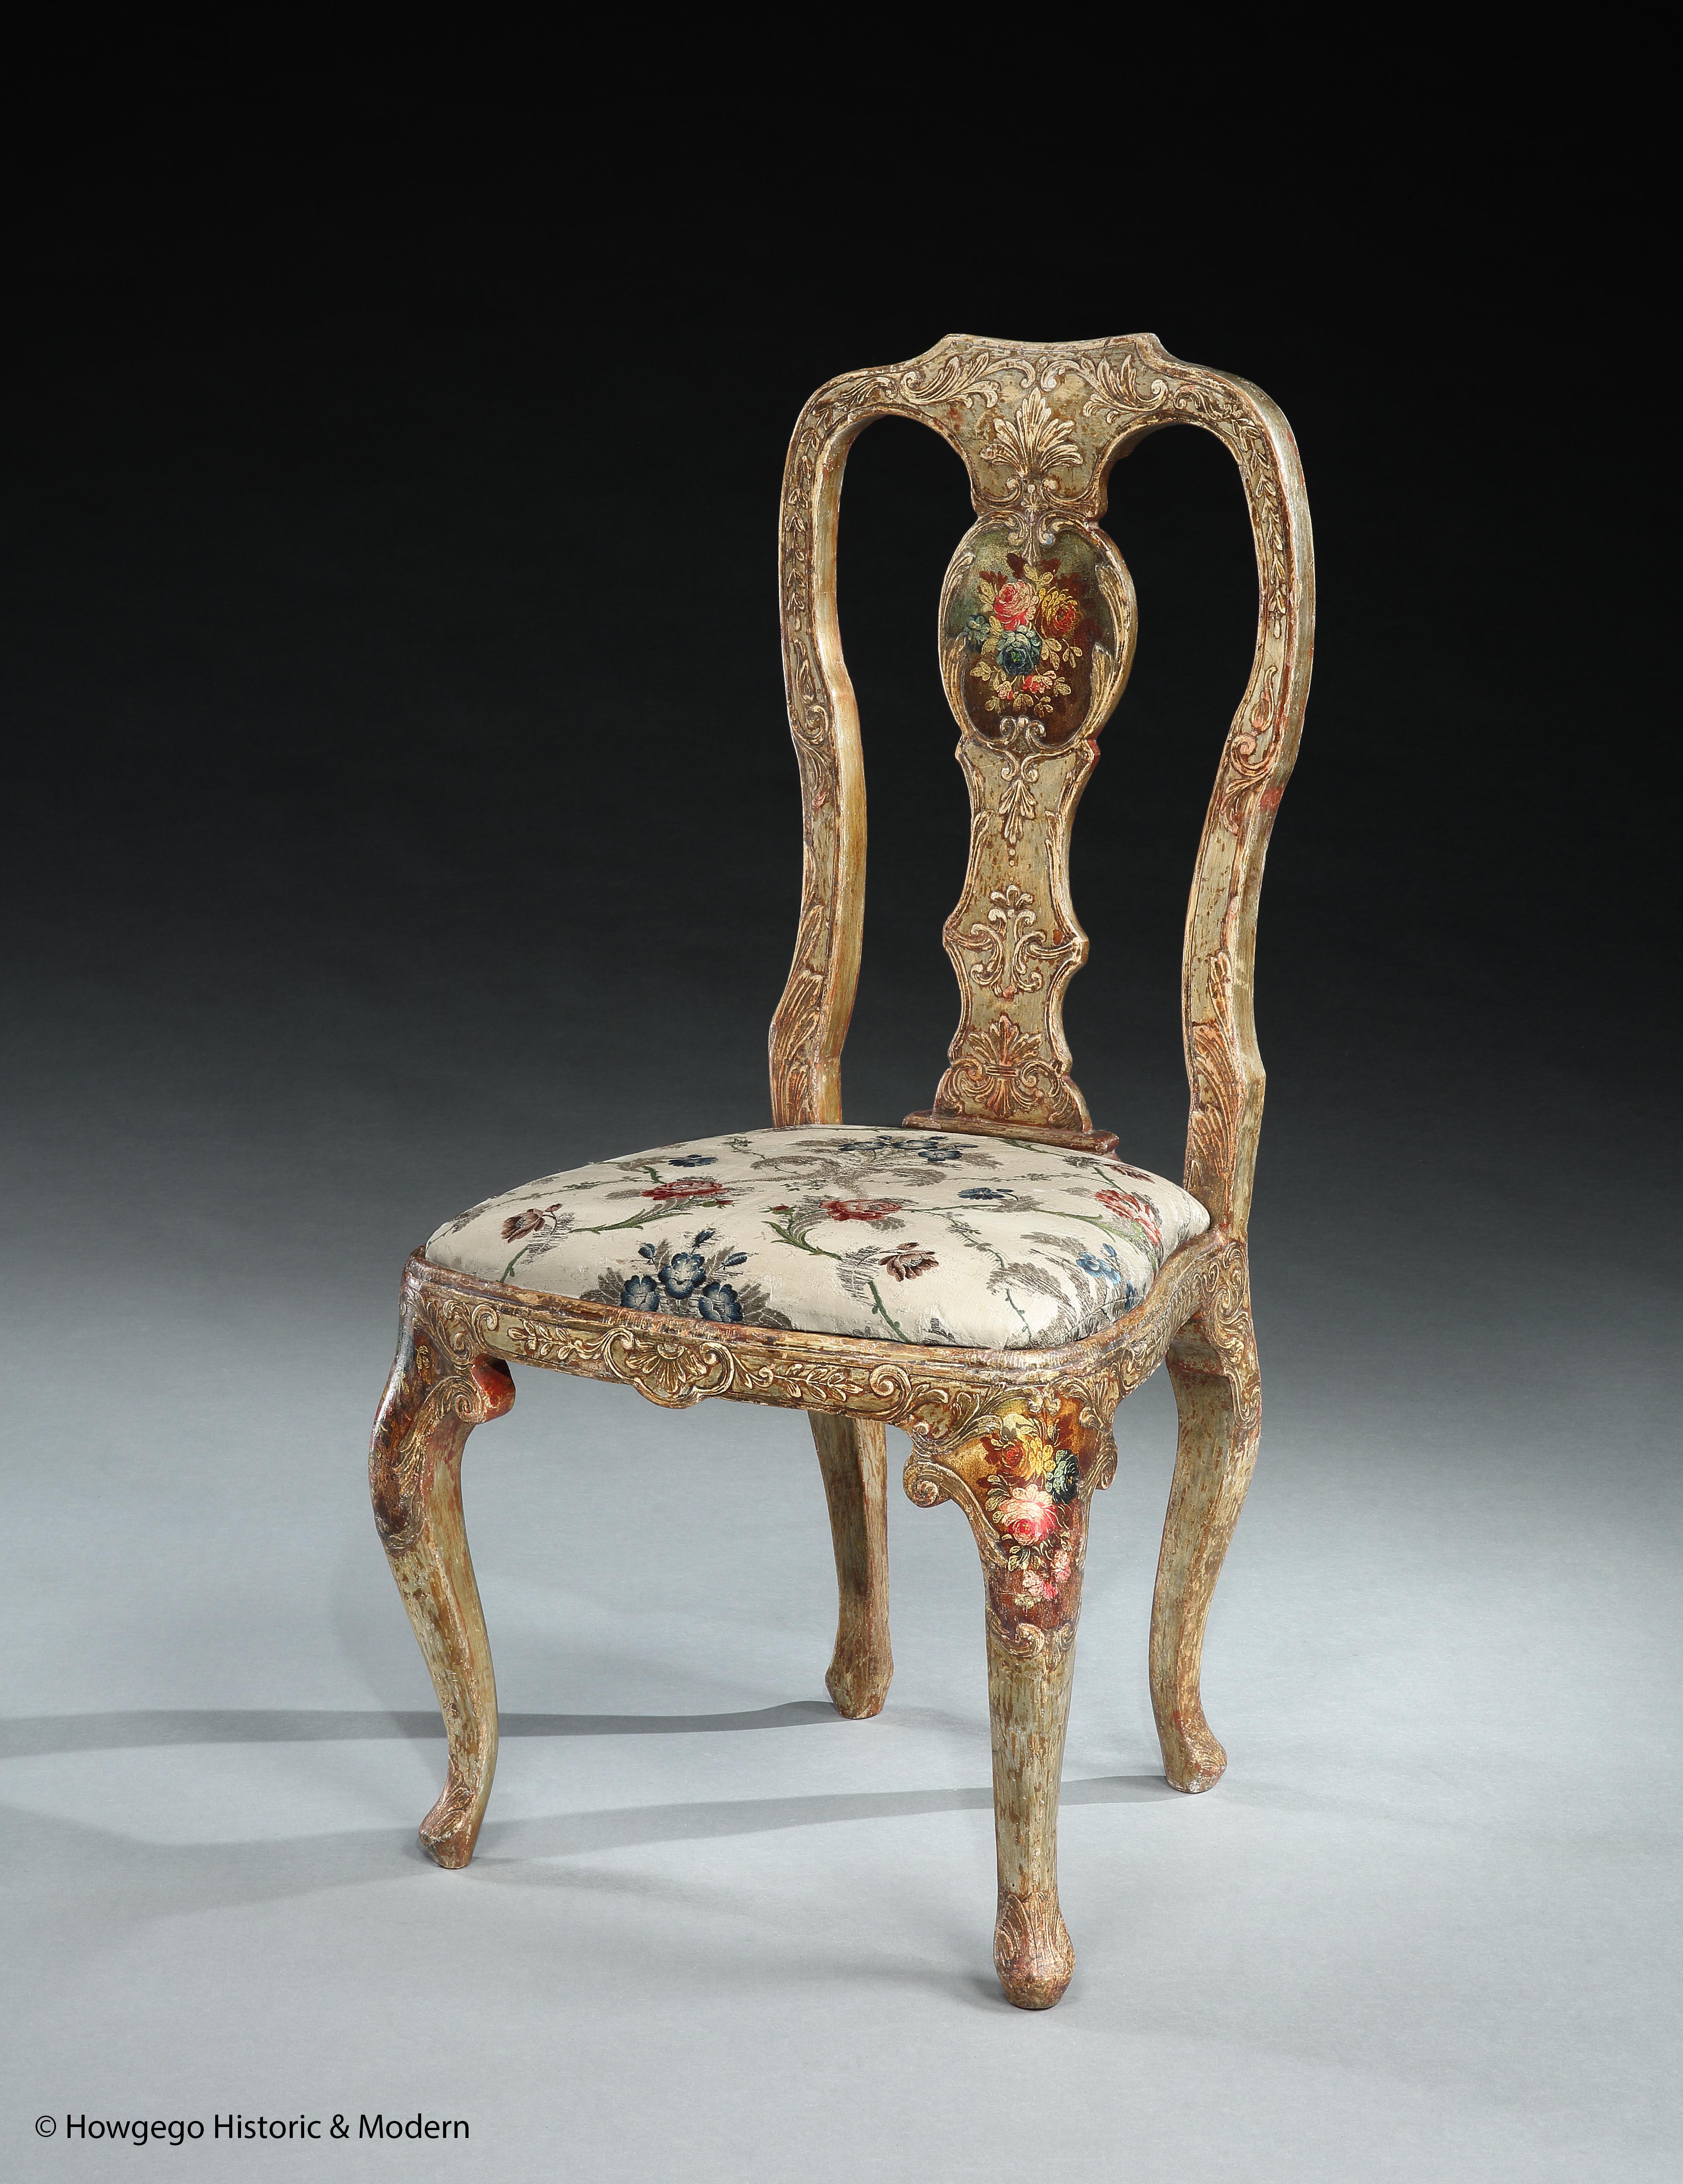 A fine, carved, silver-gilt & painted,18th century, side chair with original floral, silk Brocatelle
Feminine, sidechair in rare, original condition with original textile bringing softness and the delicacy of the flower garden into the